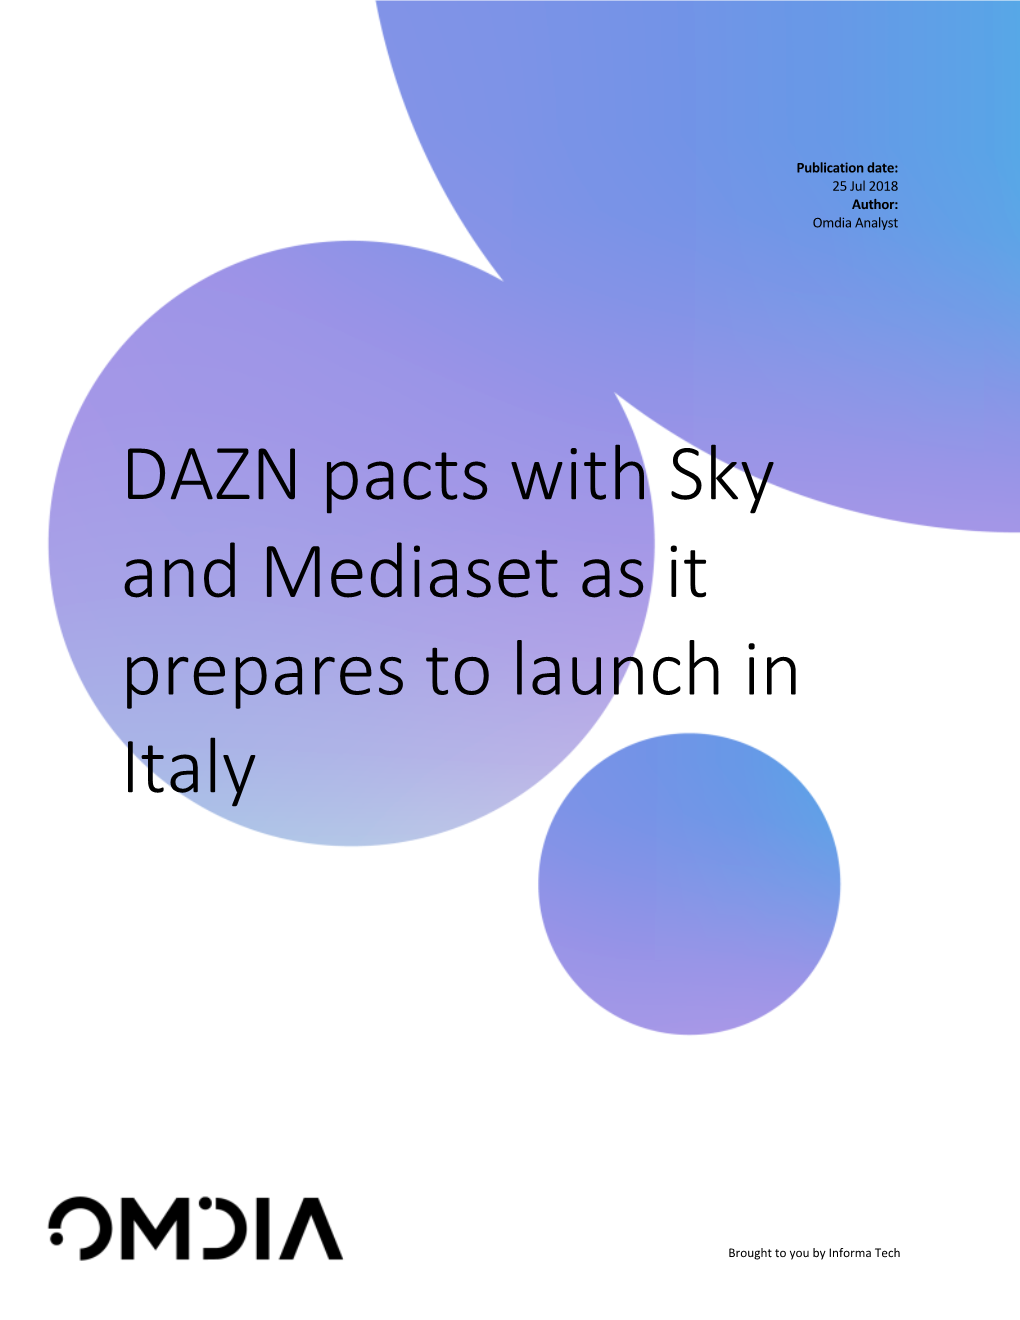 DAZN Pacts with Sky and Mediaset As It Prepares to Launch in Italy